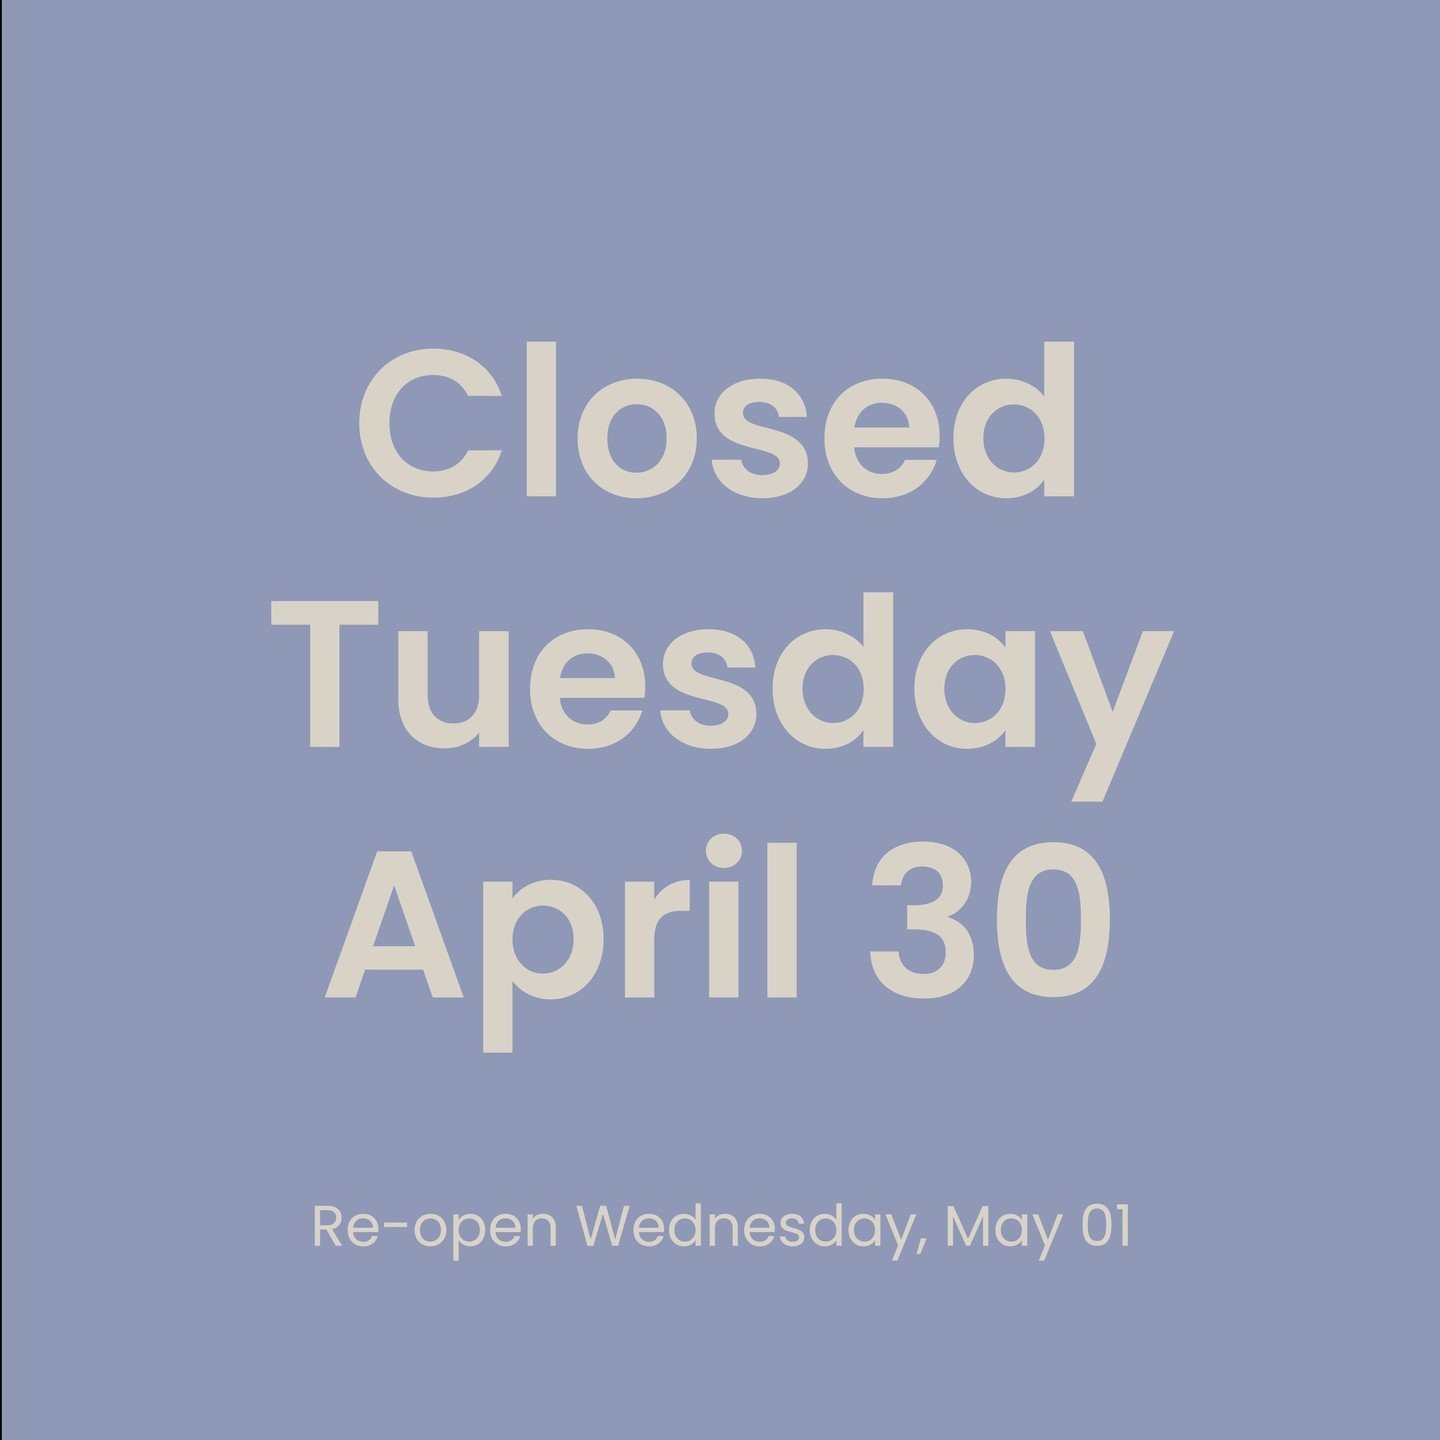 We will be closed on Tuesday, April 30! See you on Wednesday, May 1st. ⁠
⁠
#relishmuskoka